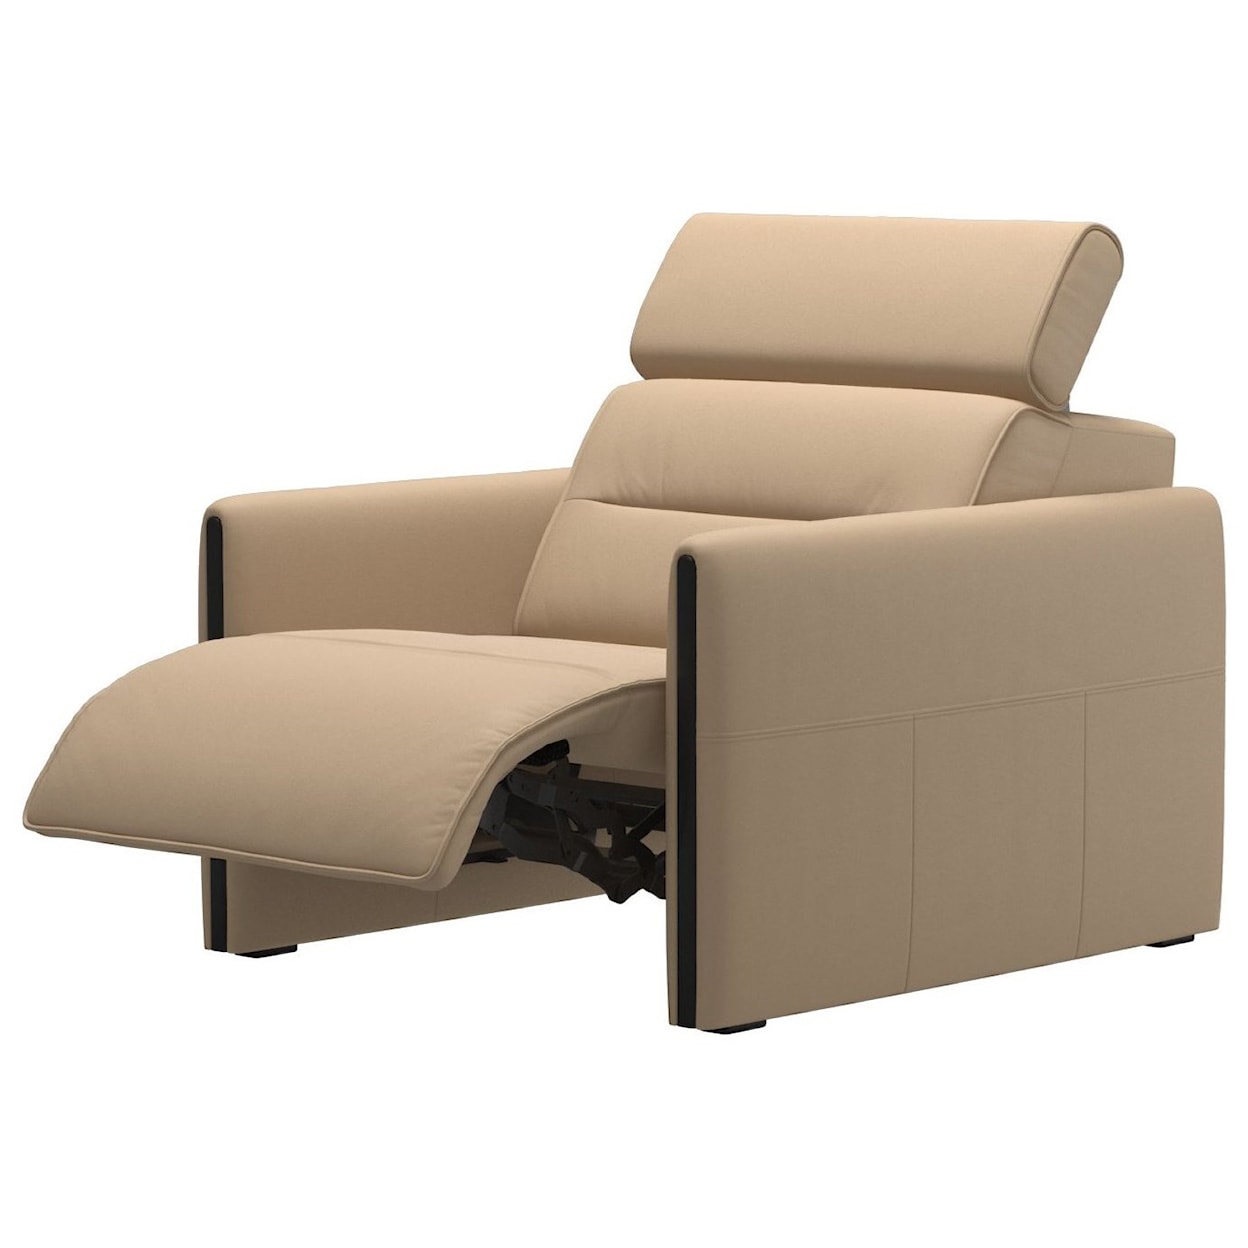 Stressless by Ekornes Emily Power Chair with Wood Arms